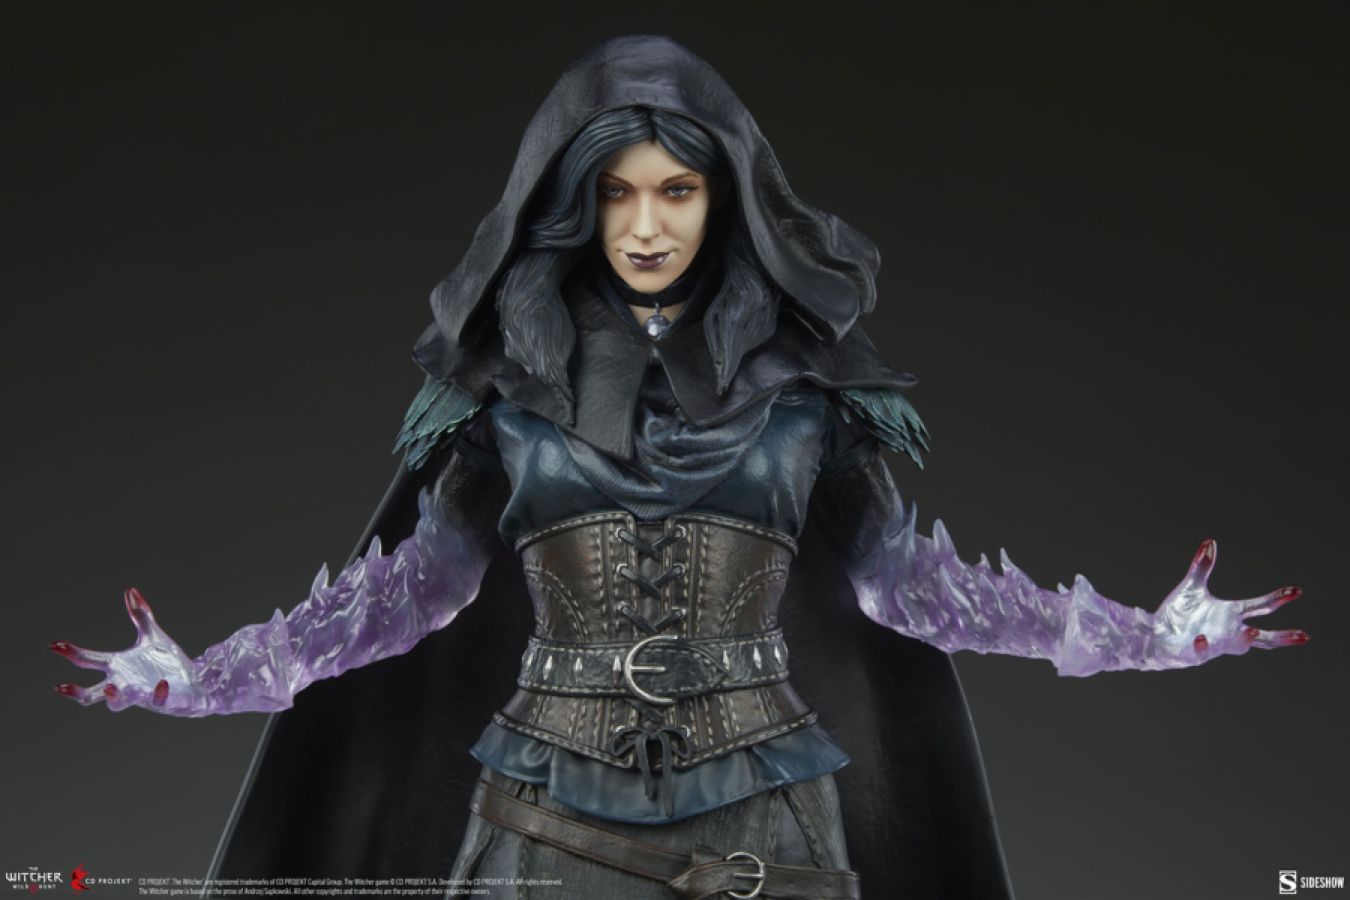 The Witcher 3: The Wild Hunt - Yennefer Statue